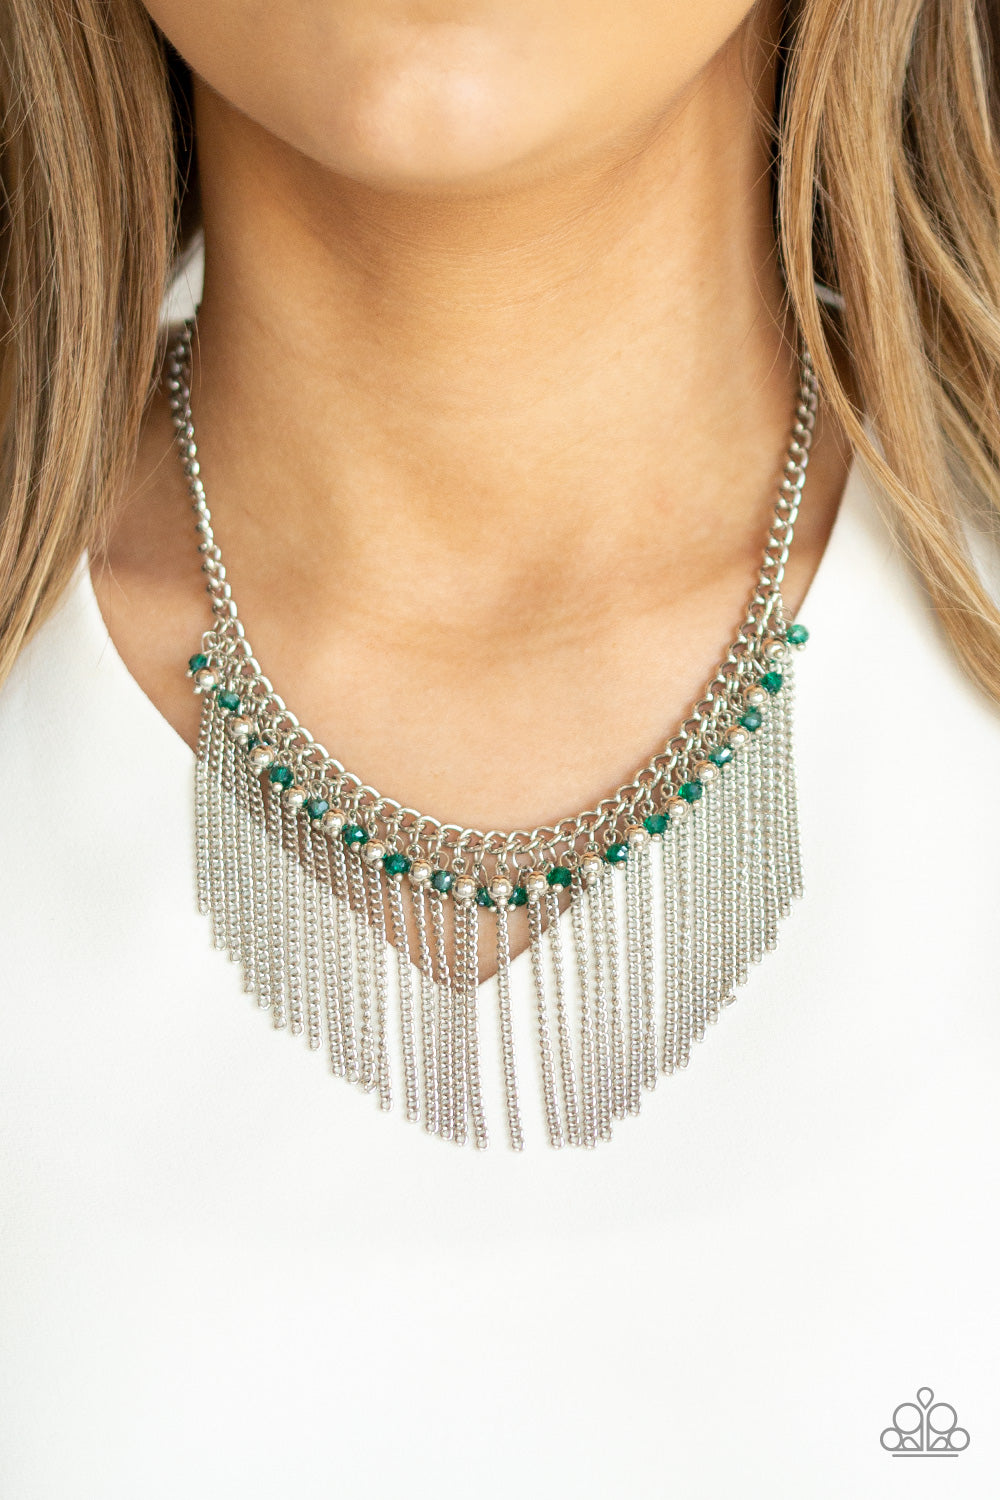 Paparazzi Accessories  - Divinely Diva - Green Necklace